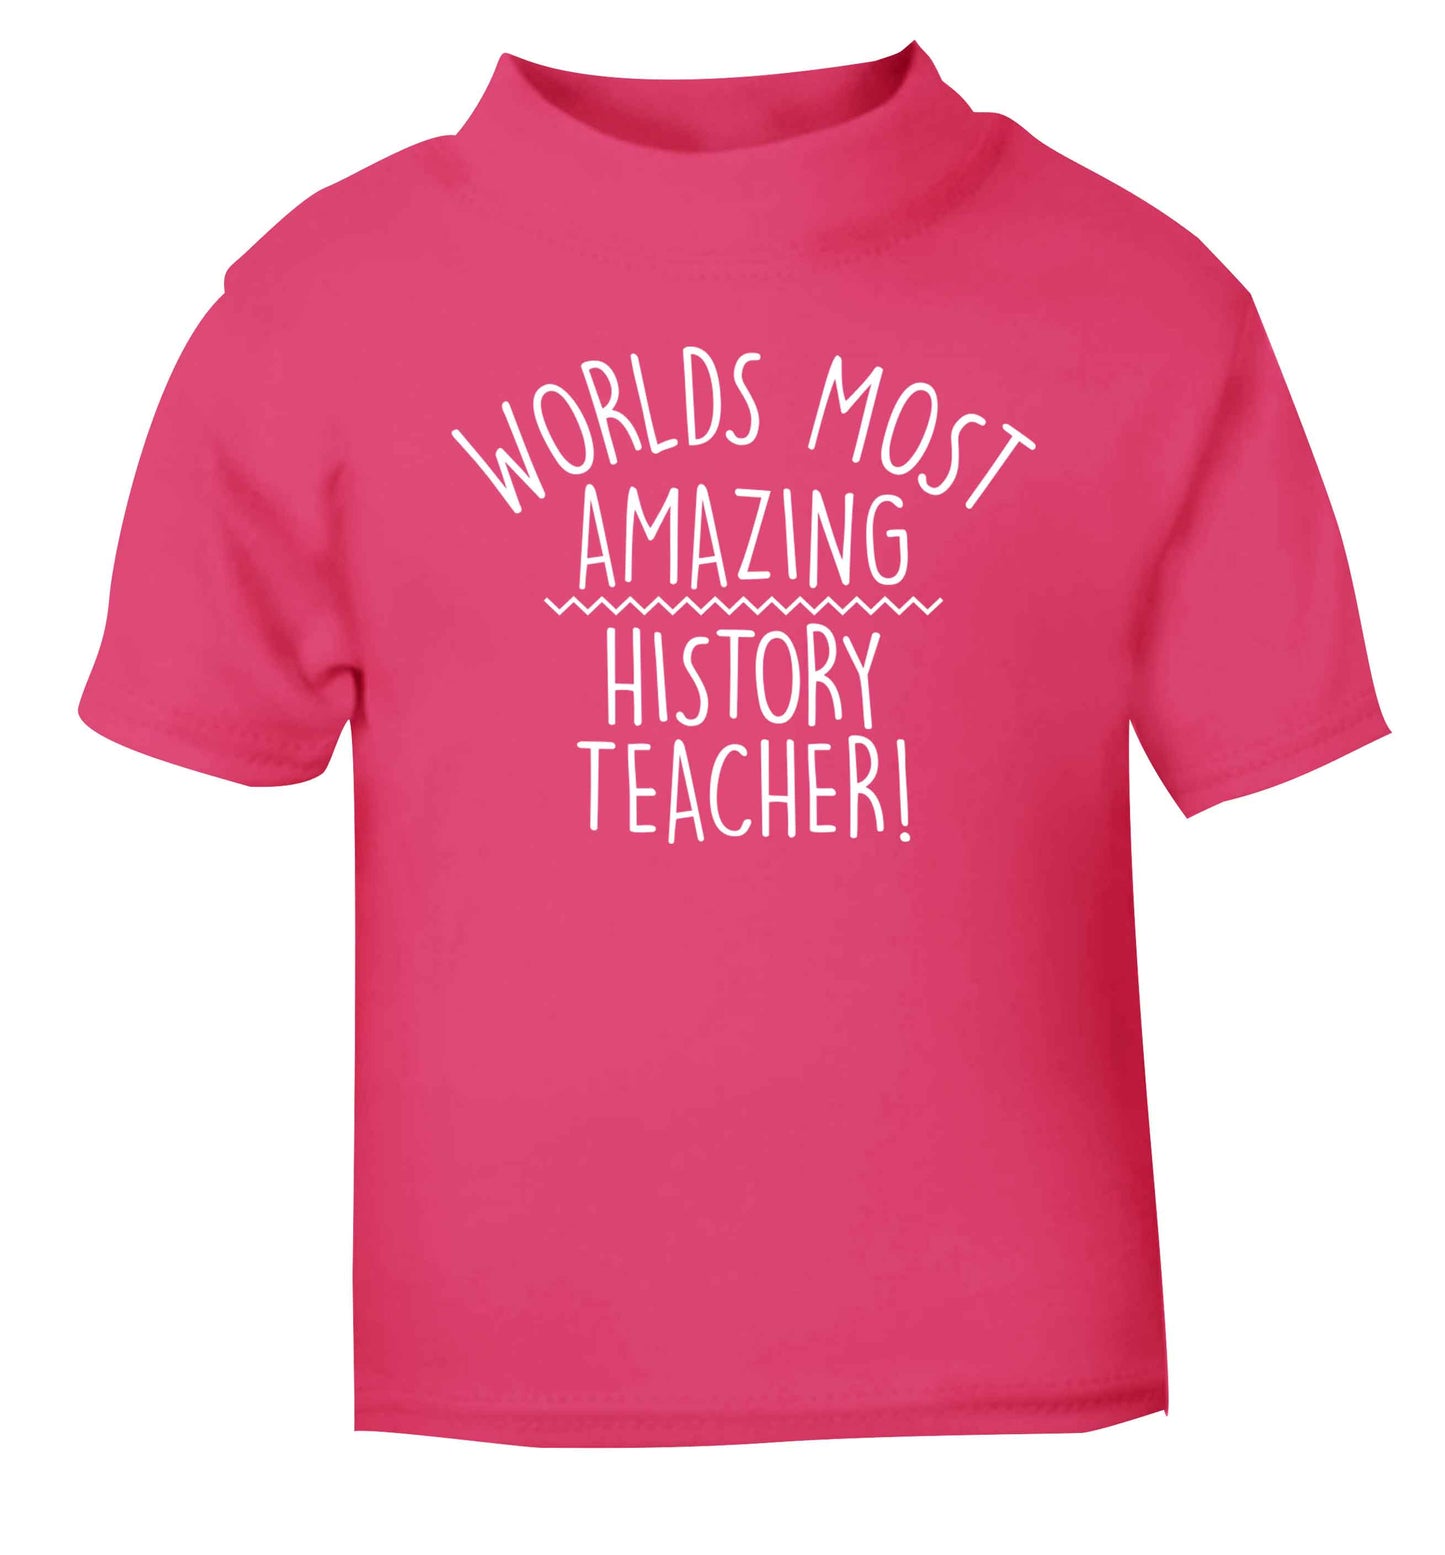 Worlds most amazing History teacher pink baby toddler Tshirt 2 Years